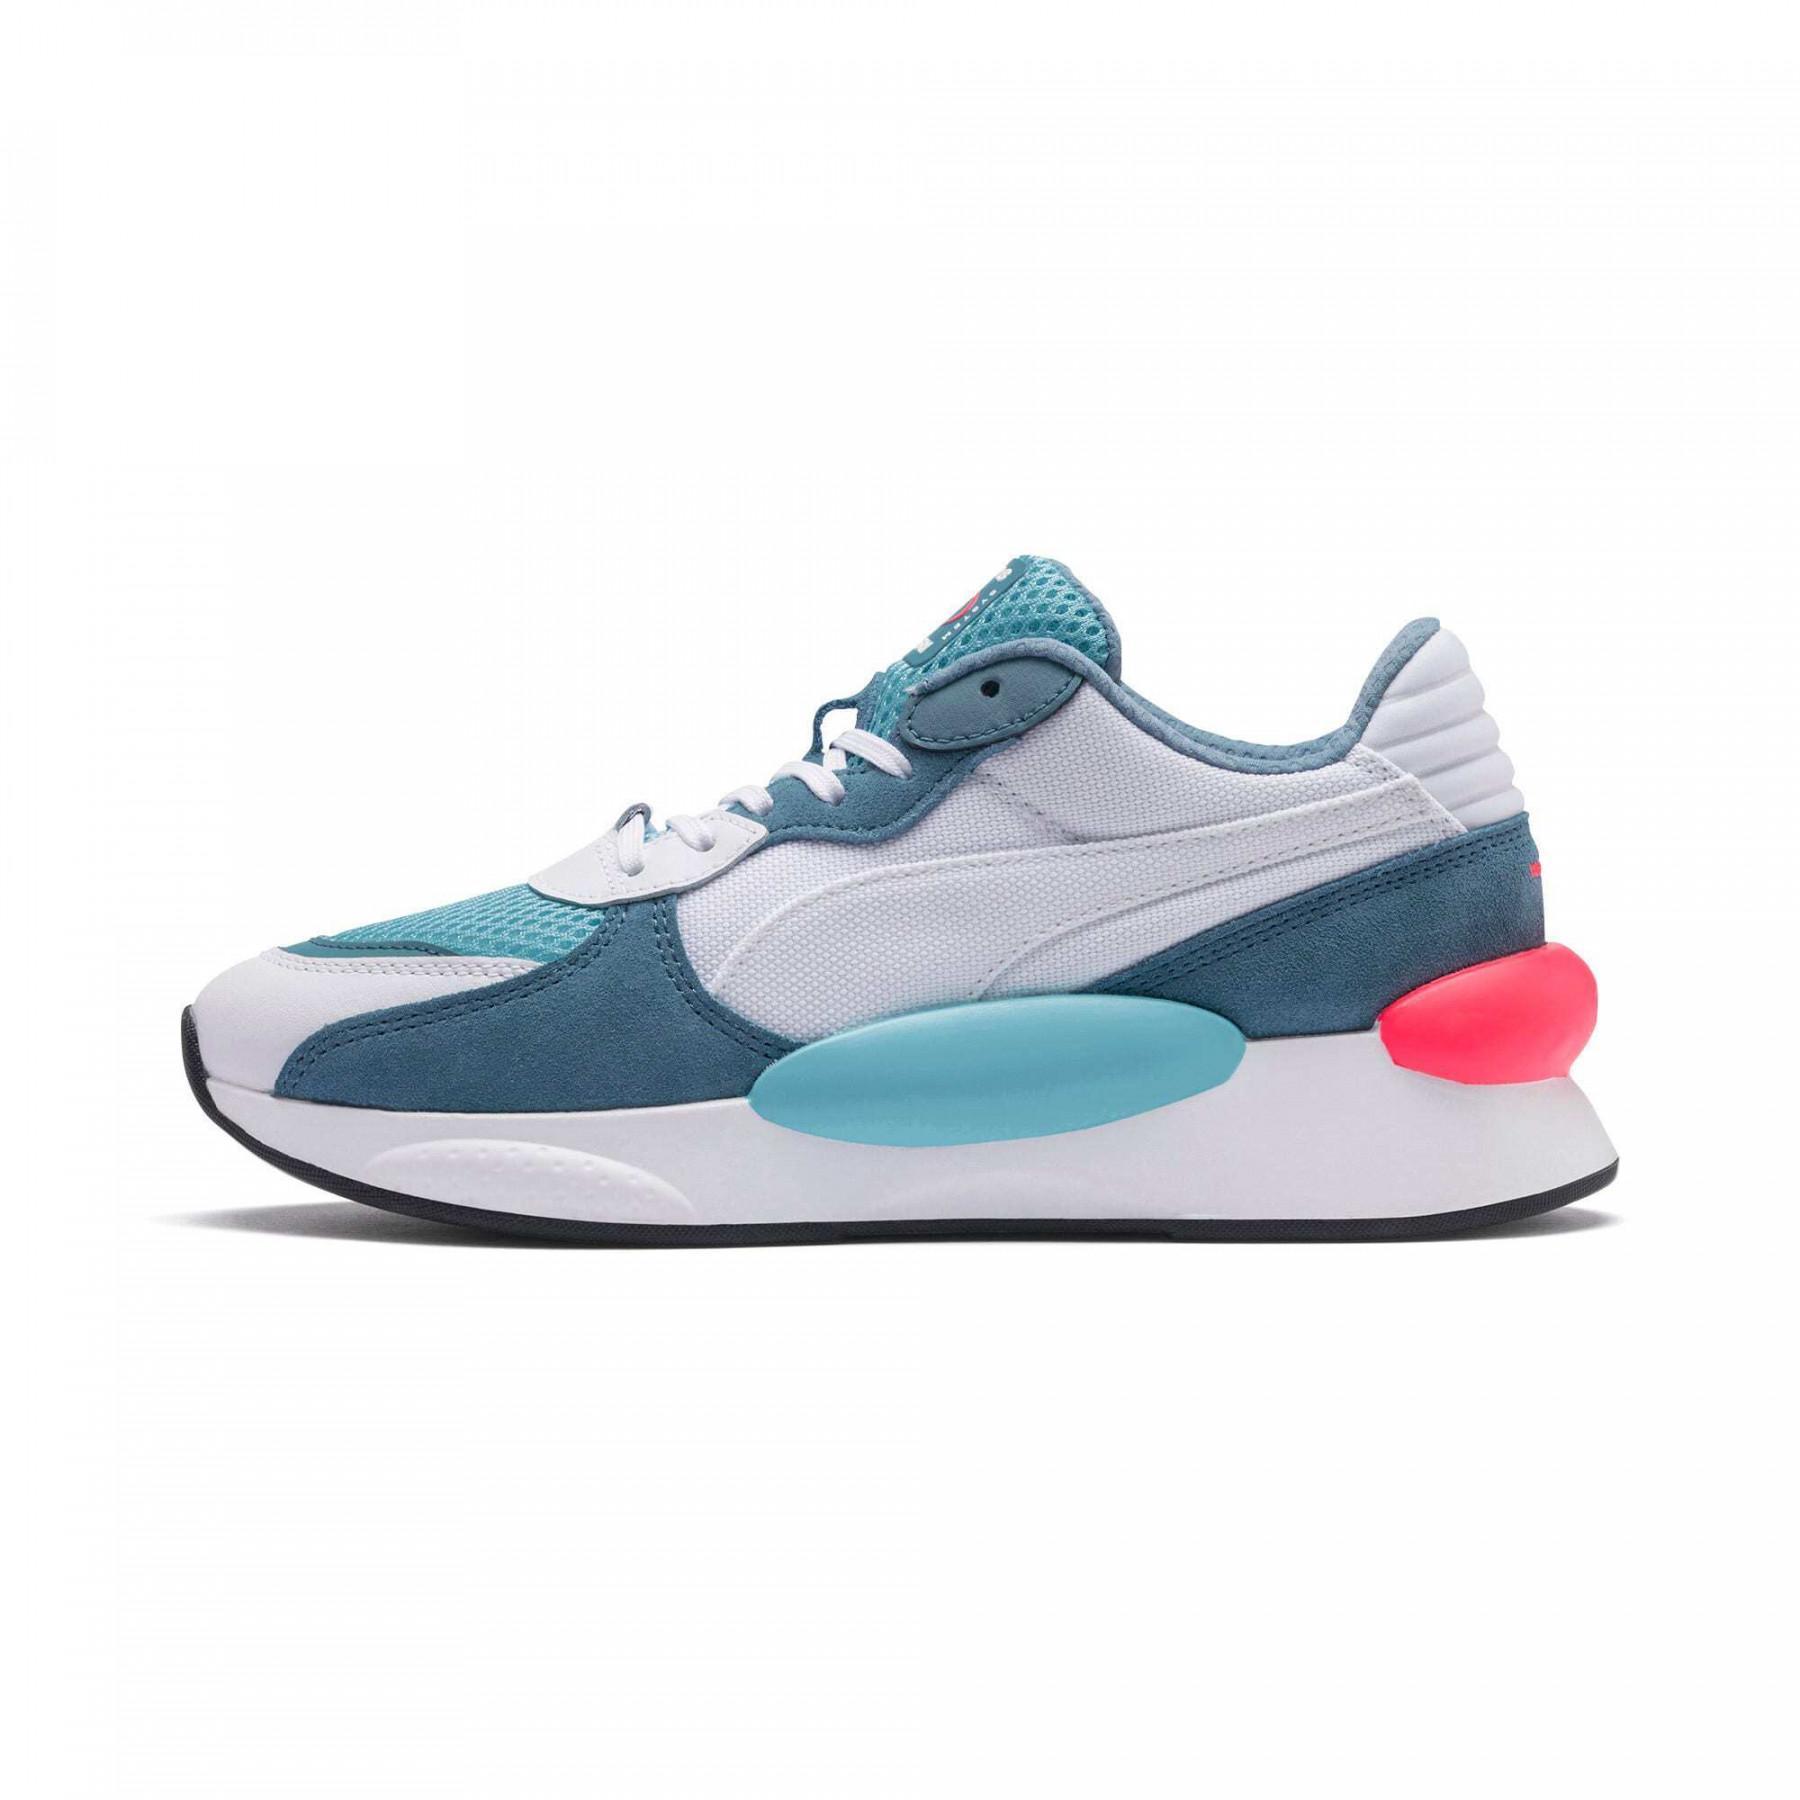 sneakers Puma RS 9.8 Puma - Women's Sneakers - Lifestyle